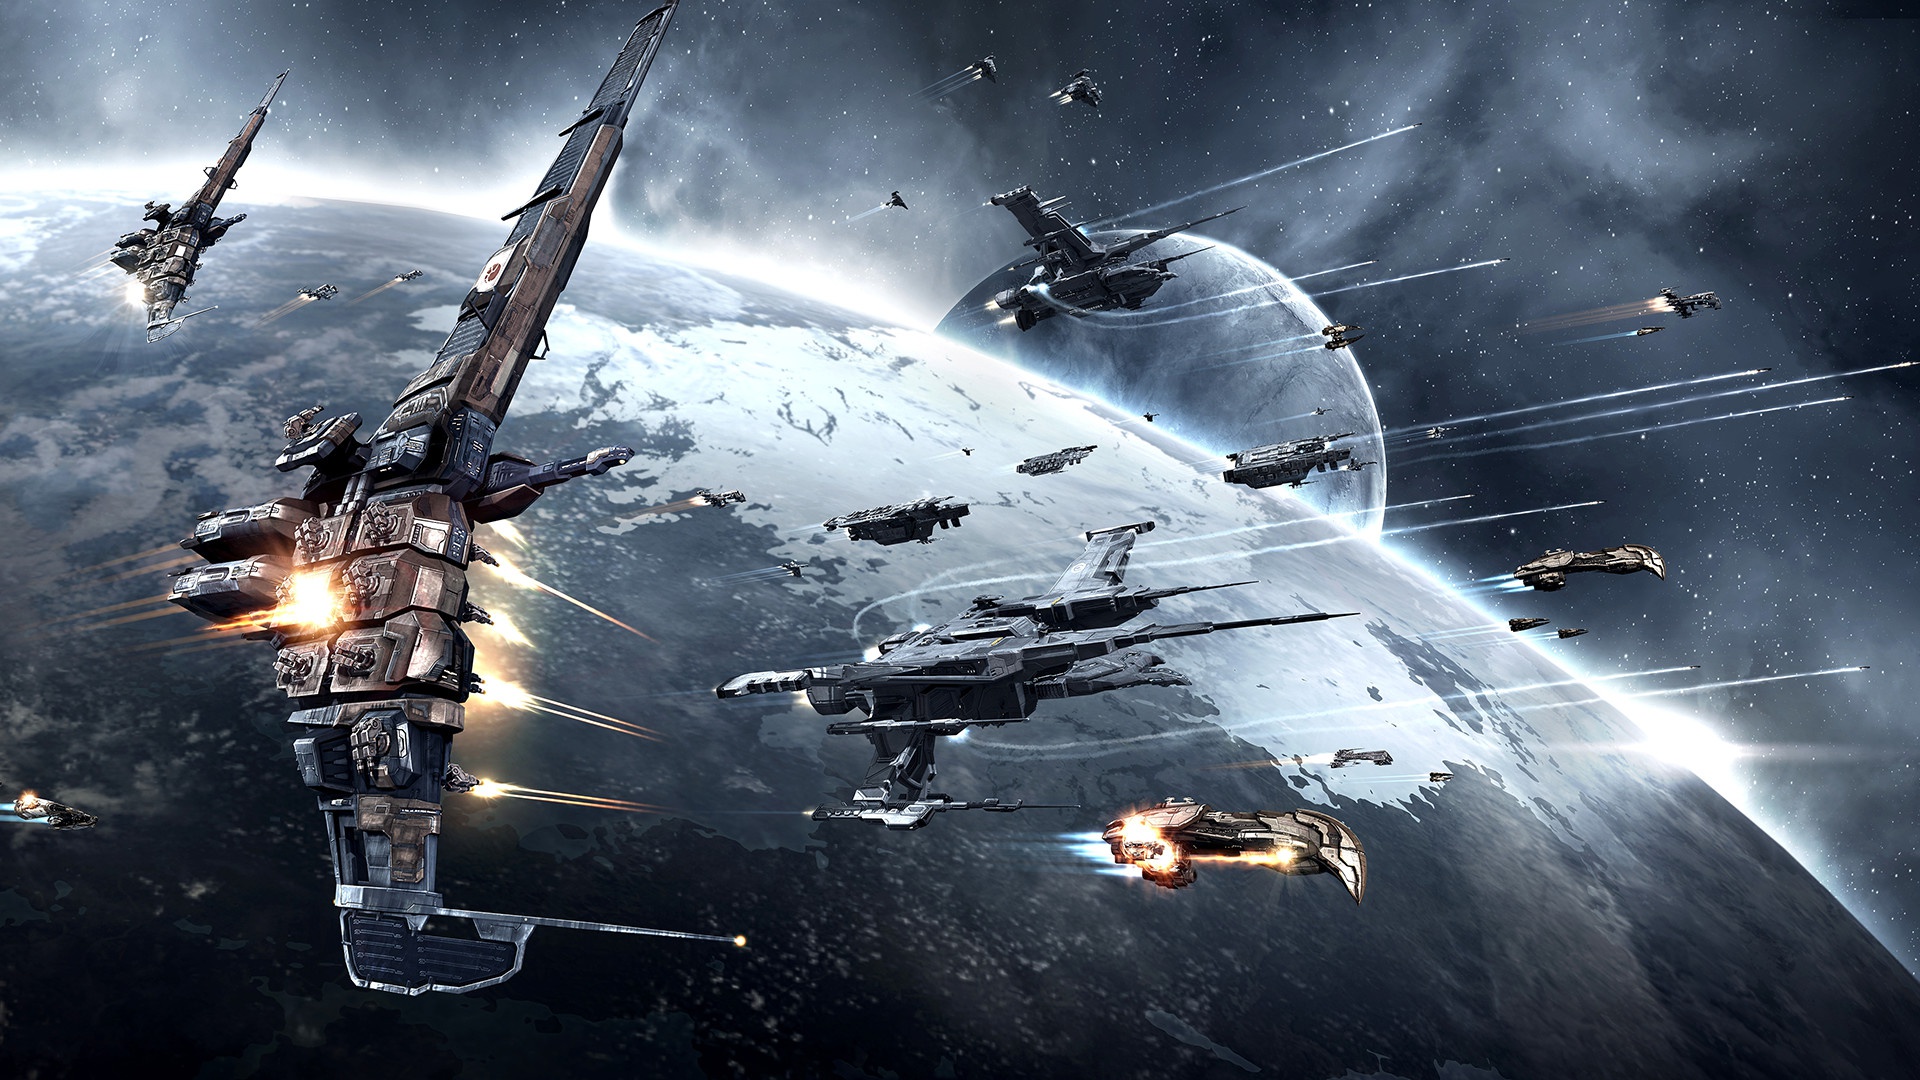 General 1920x1080 EVE Online PC gaming science fiction video game art space